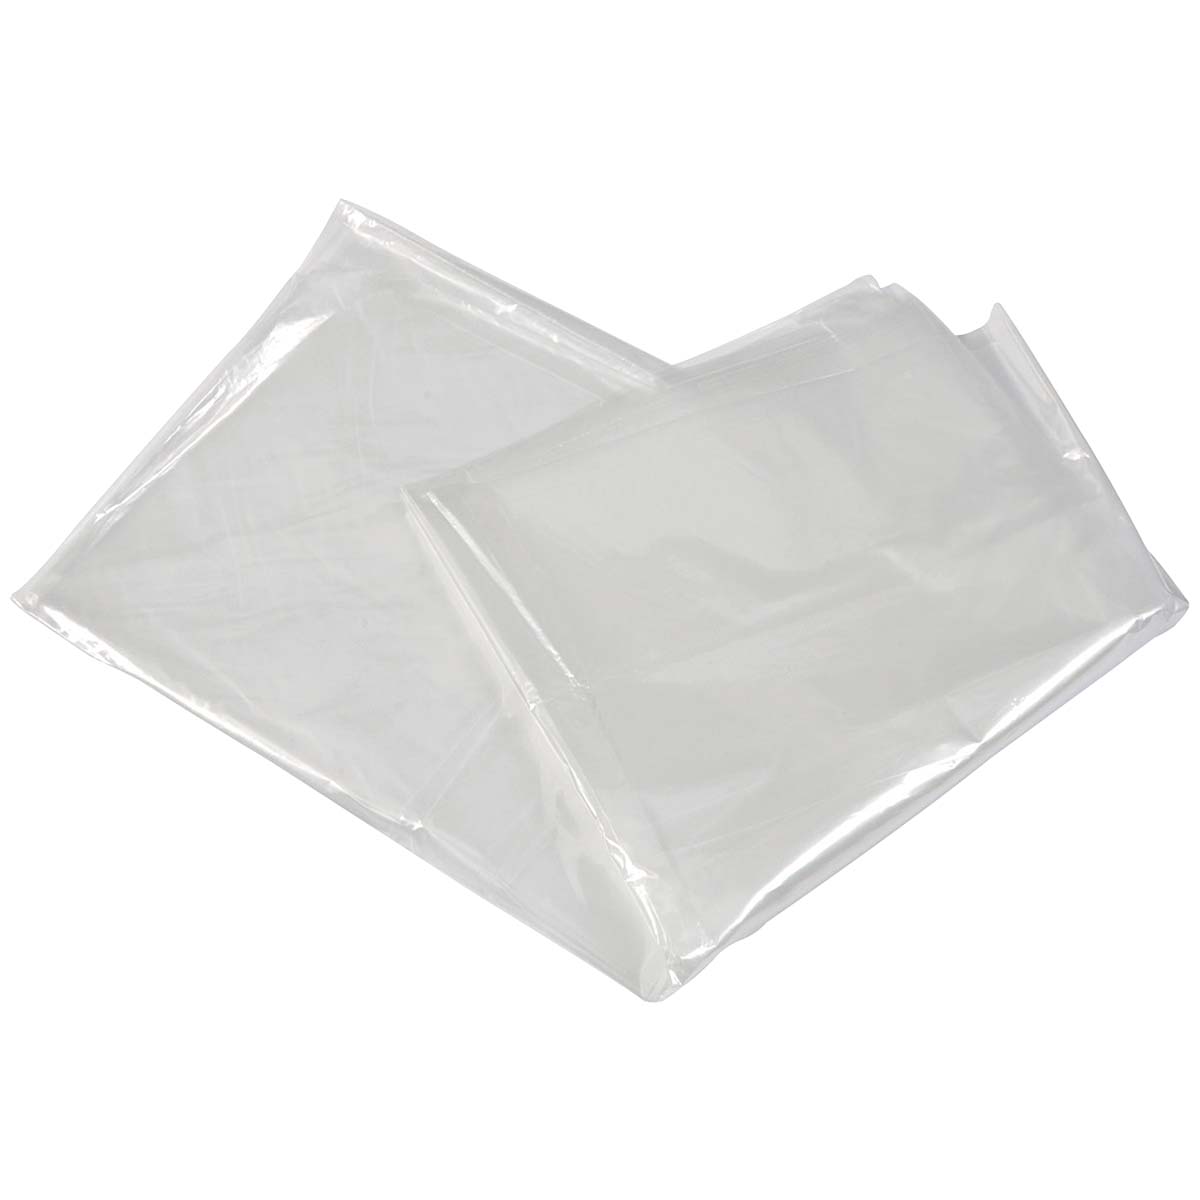 4215809 "A strong and thicker ground sail. This keeps the tent's ground sail clean and condensation of moisture is also prevented. Made from 0.03 millimetre 'low density polyethylene' (LDPE). Contains no plasticizers so the coating of the ground sail is not affected."